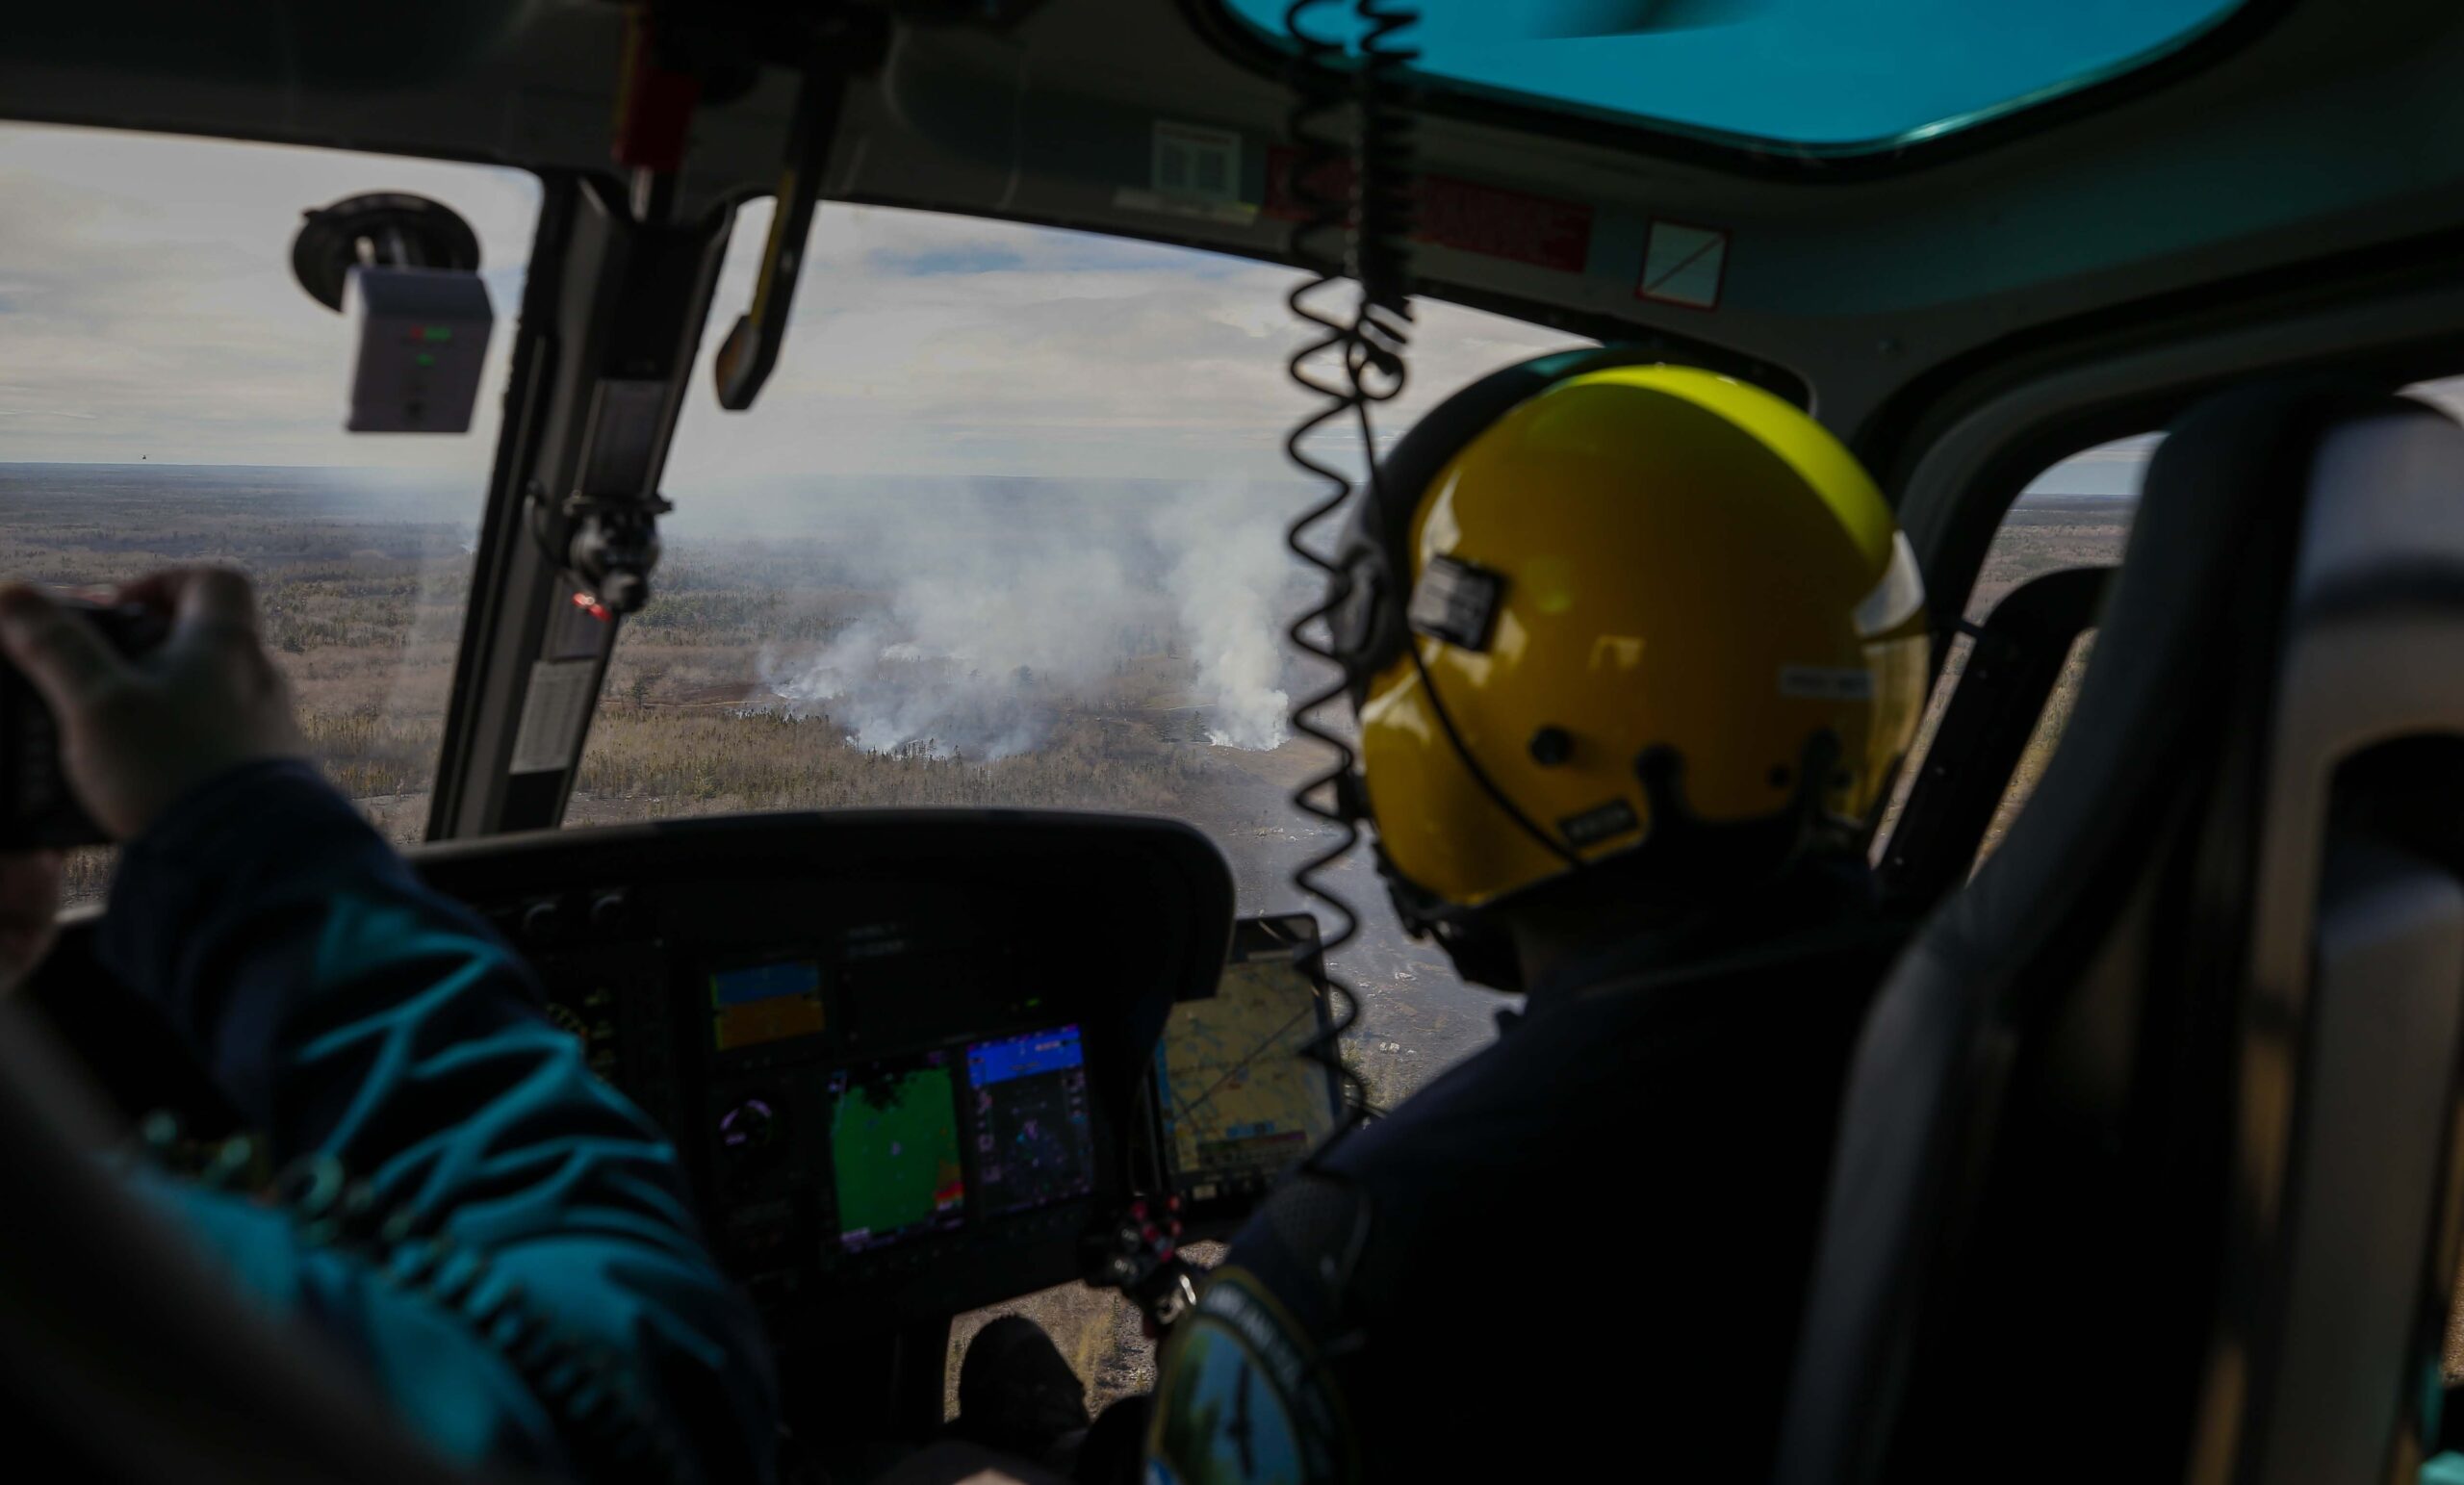 Helicopter cockpit picture of a pilot surveying forest fire smoke in the distance